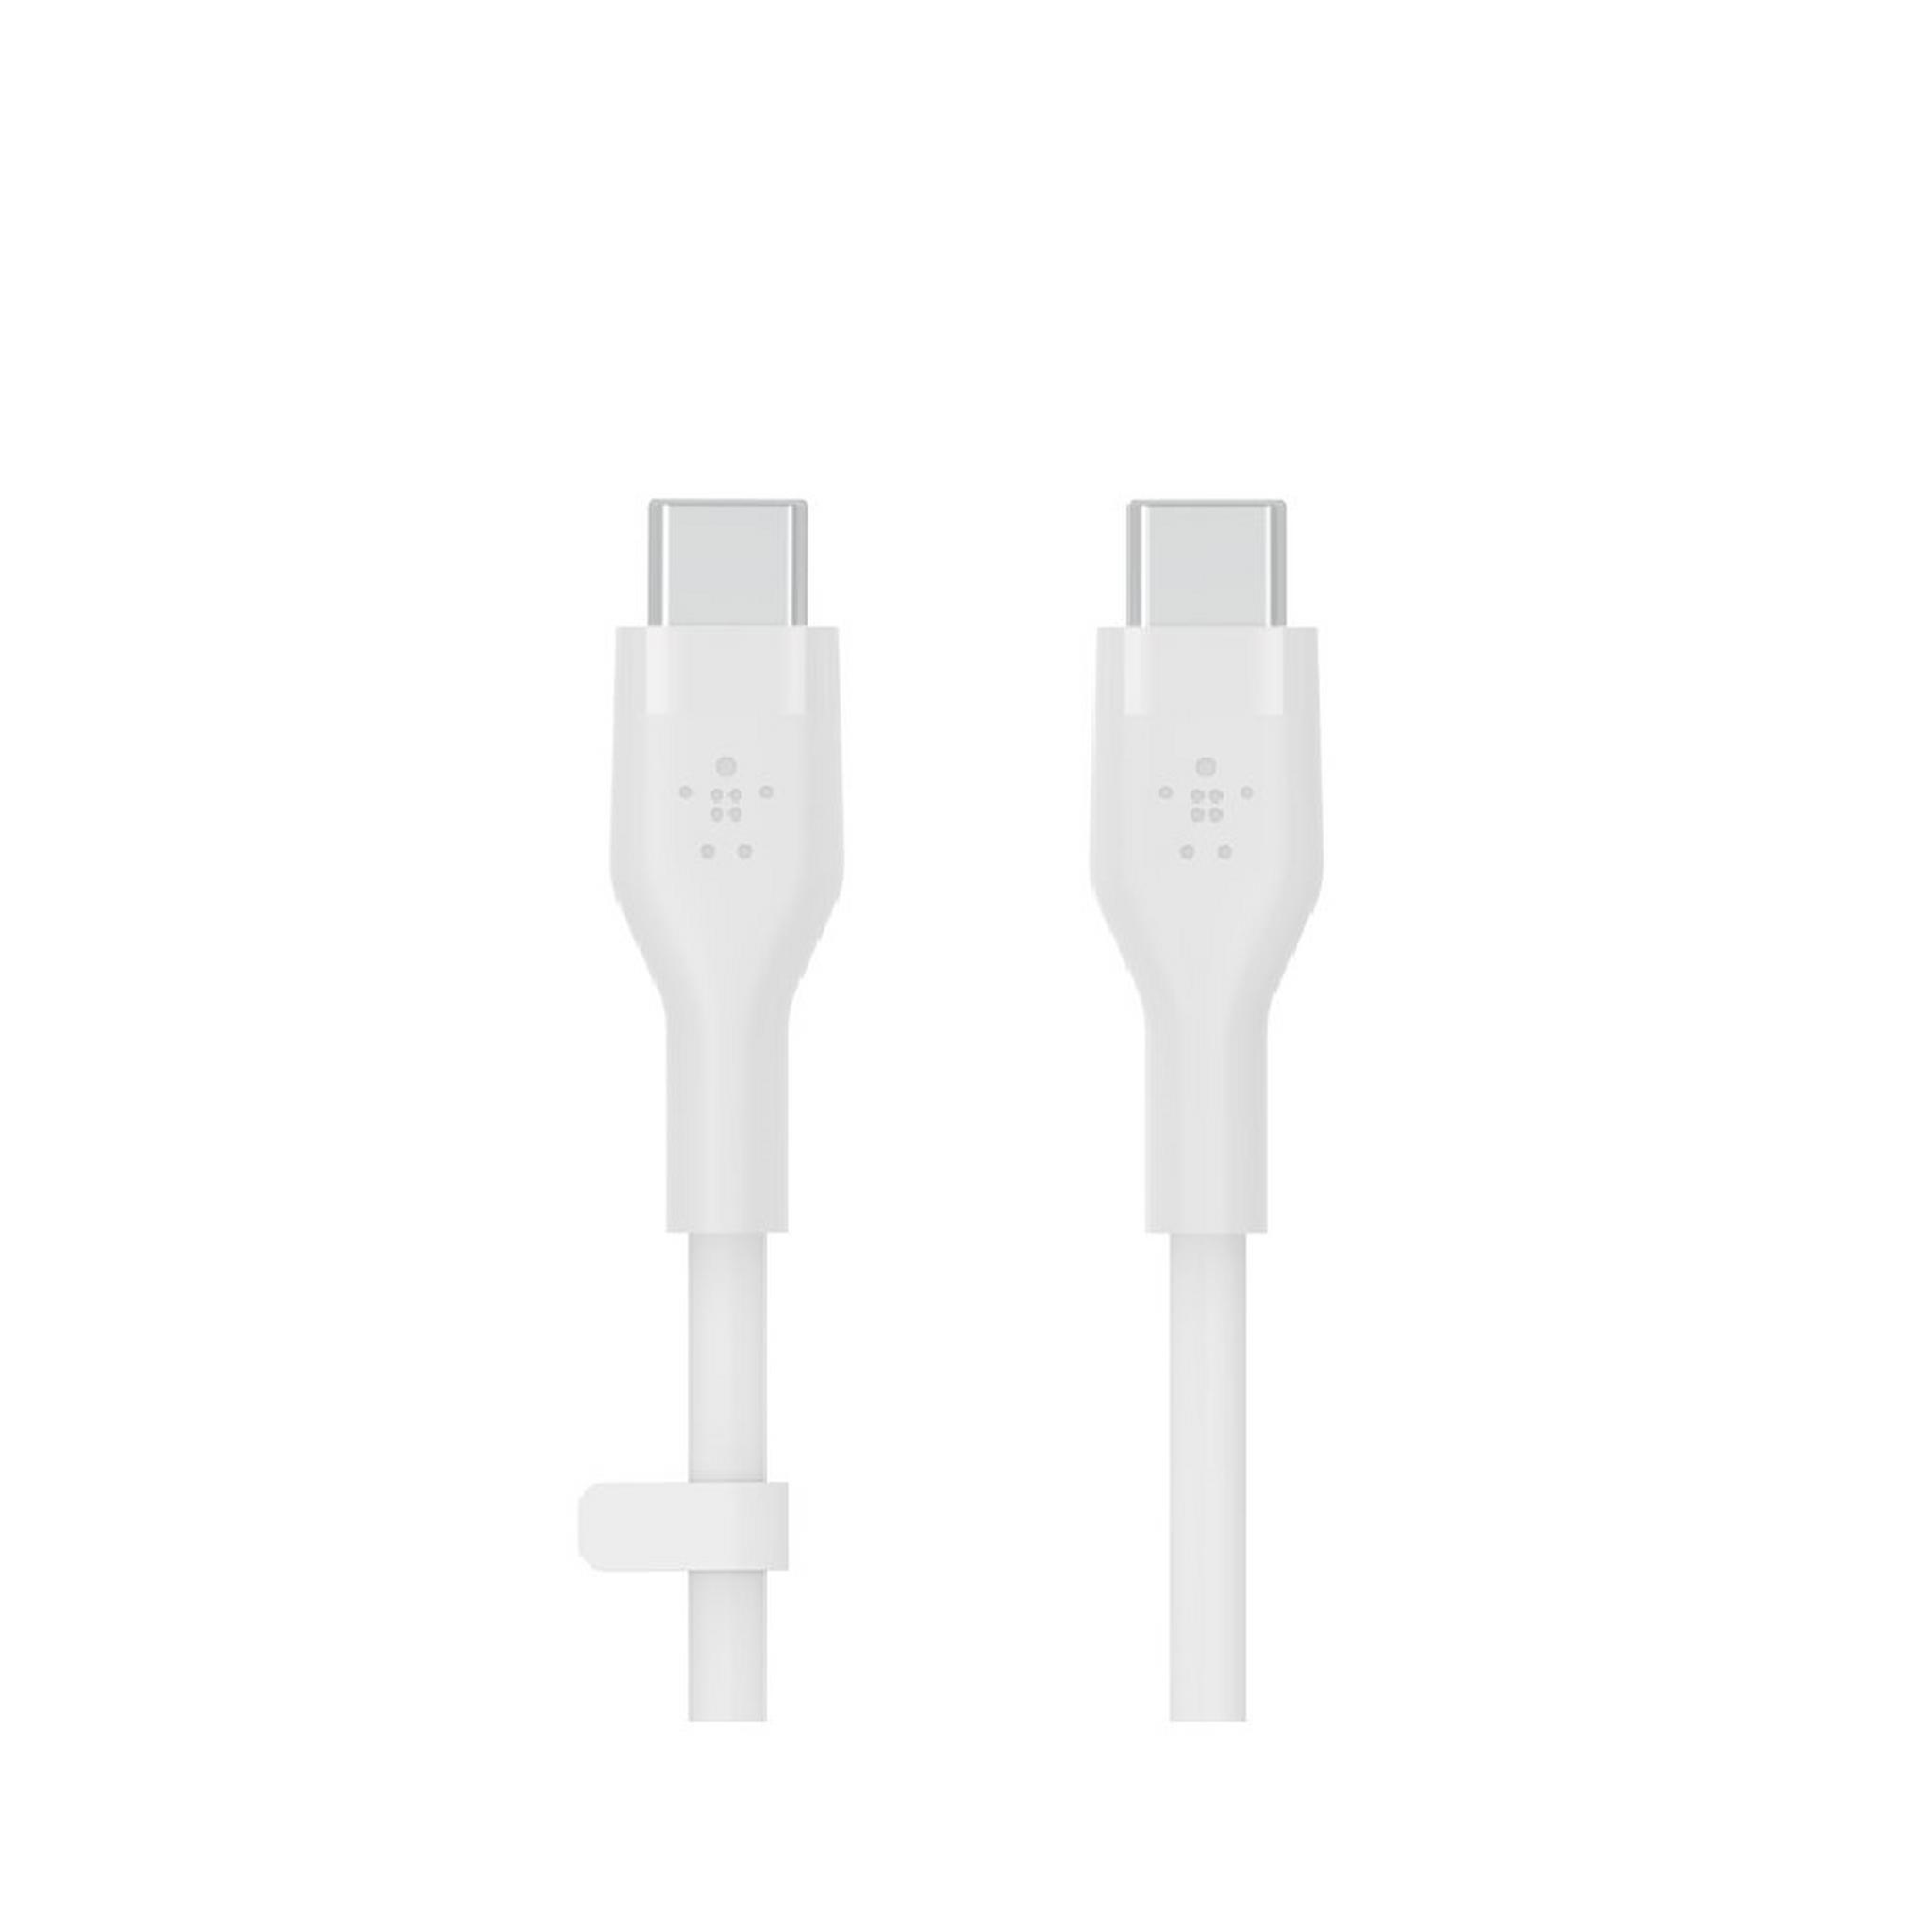 BELKIN Boostcharge USB-C To USB-C Cable, 1M, CAB009bt1MWH - White